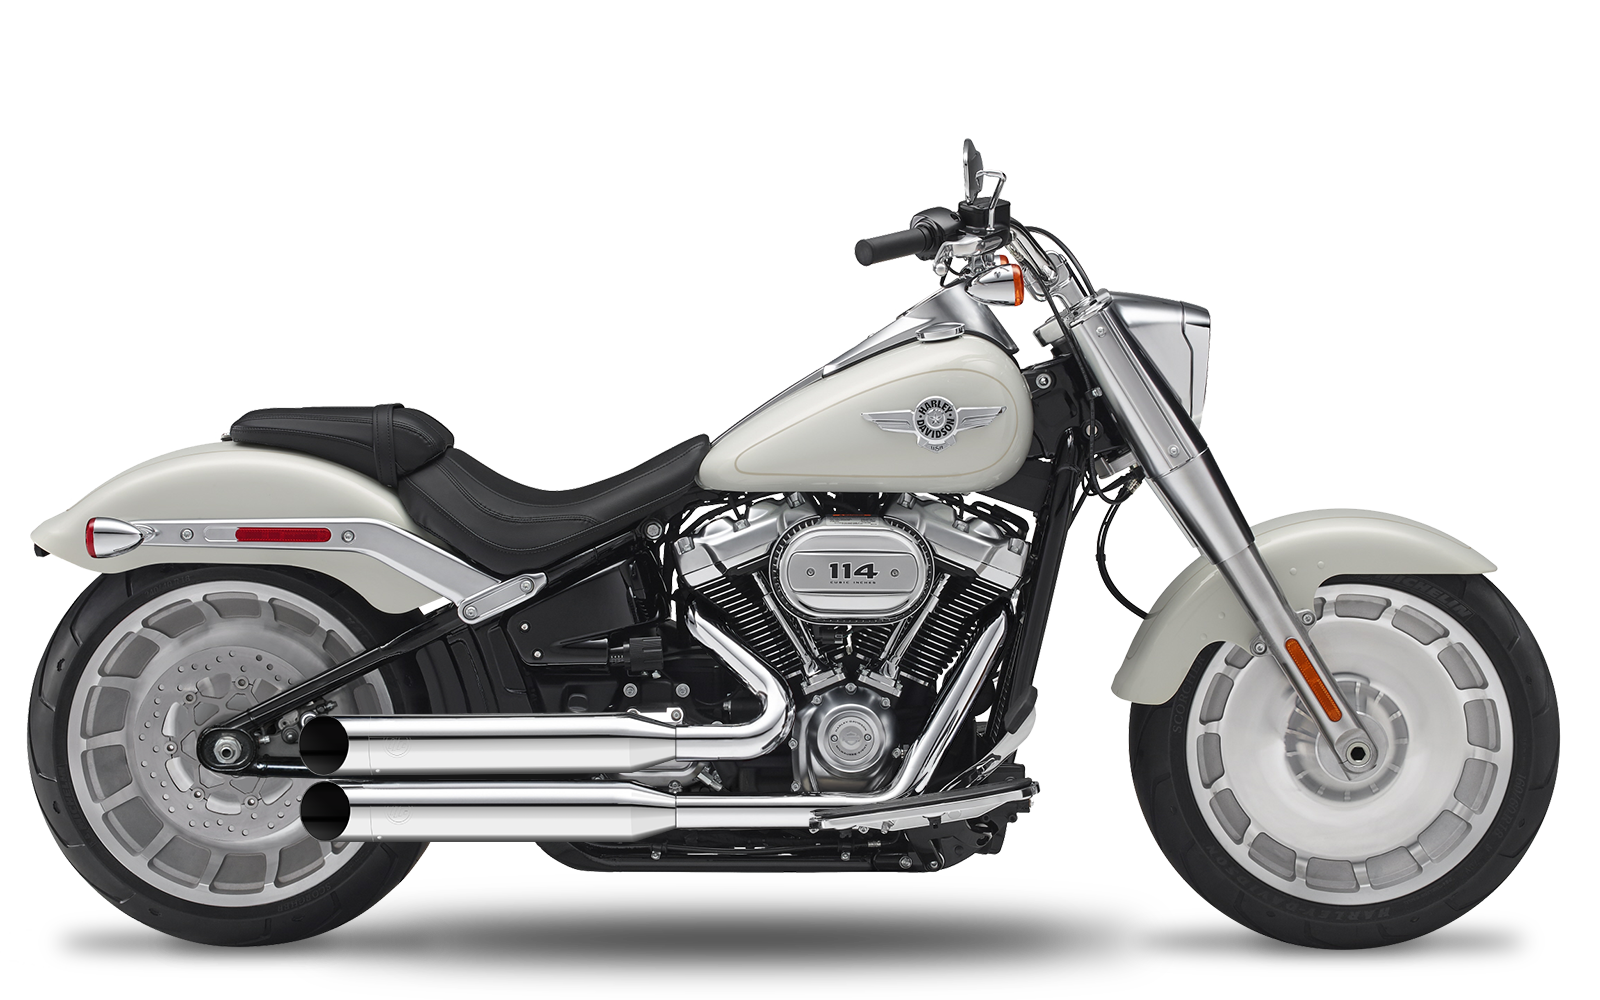 CRUISER/SOFTAIL - Fat Boy - ME107 - 2018-2020 - Complete systems adjustable